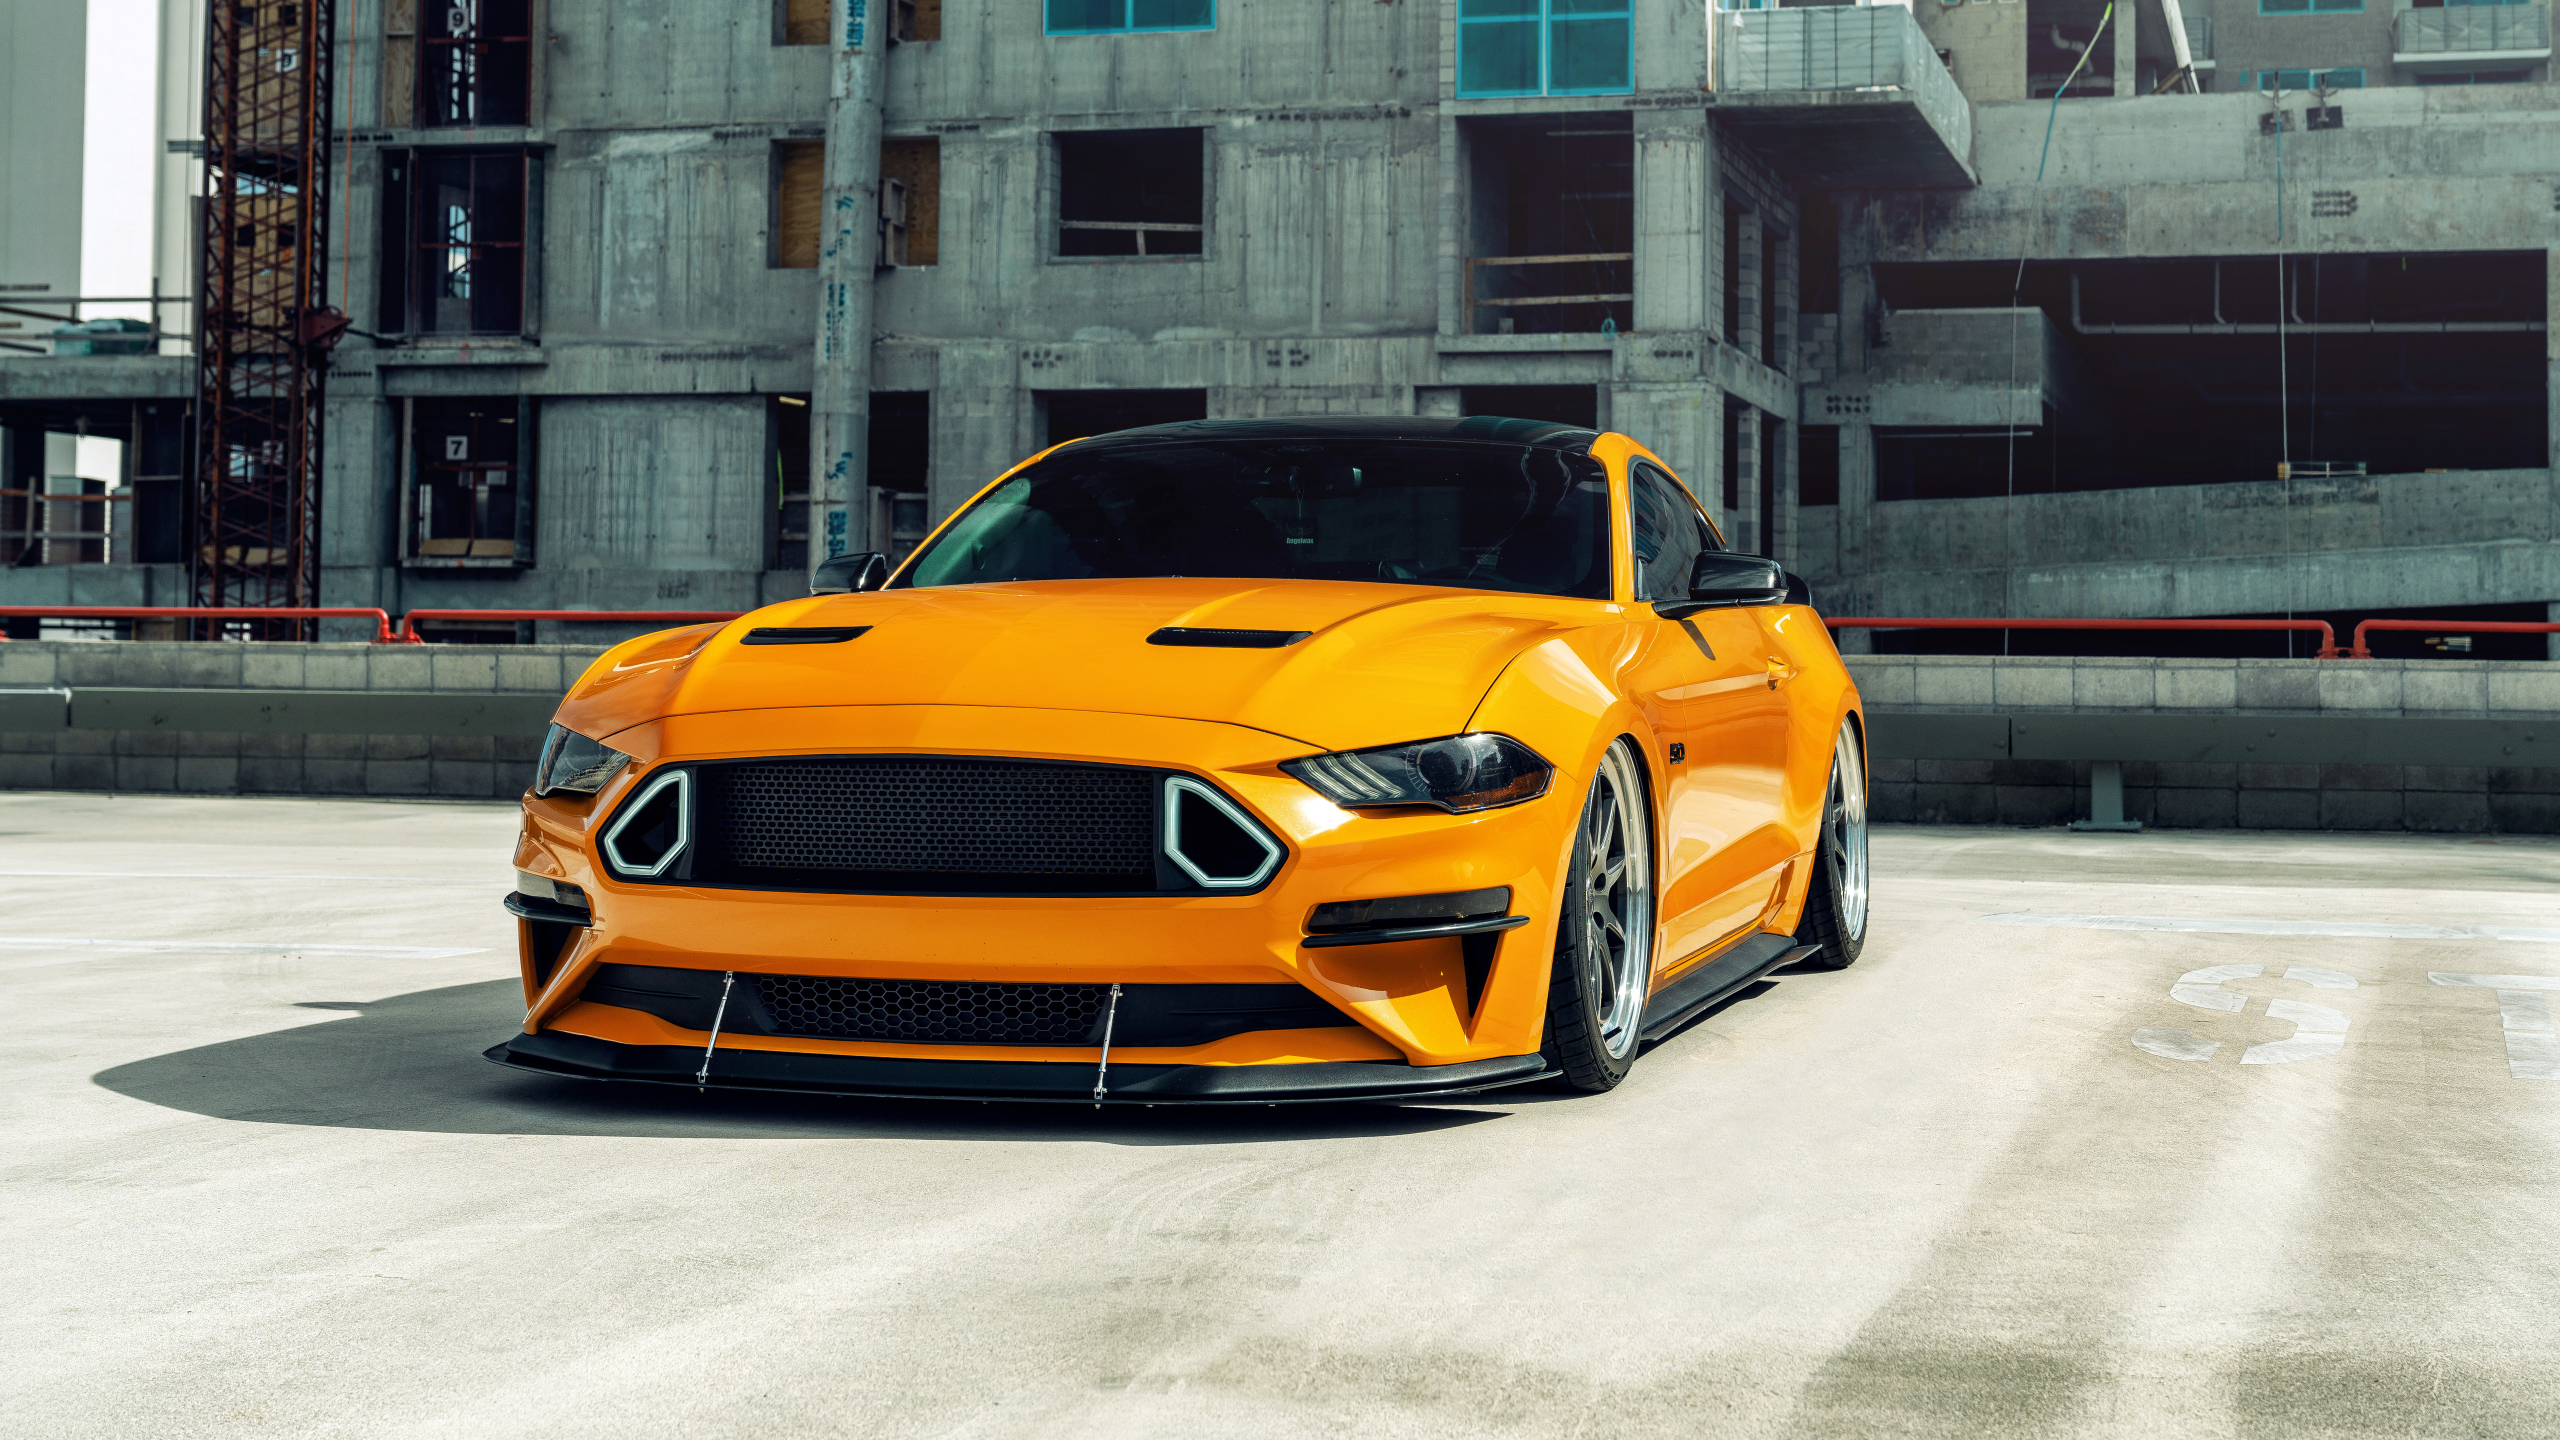 Yellow Ford Mustang GT, 2020, 2560x1440 wallpaper